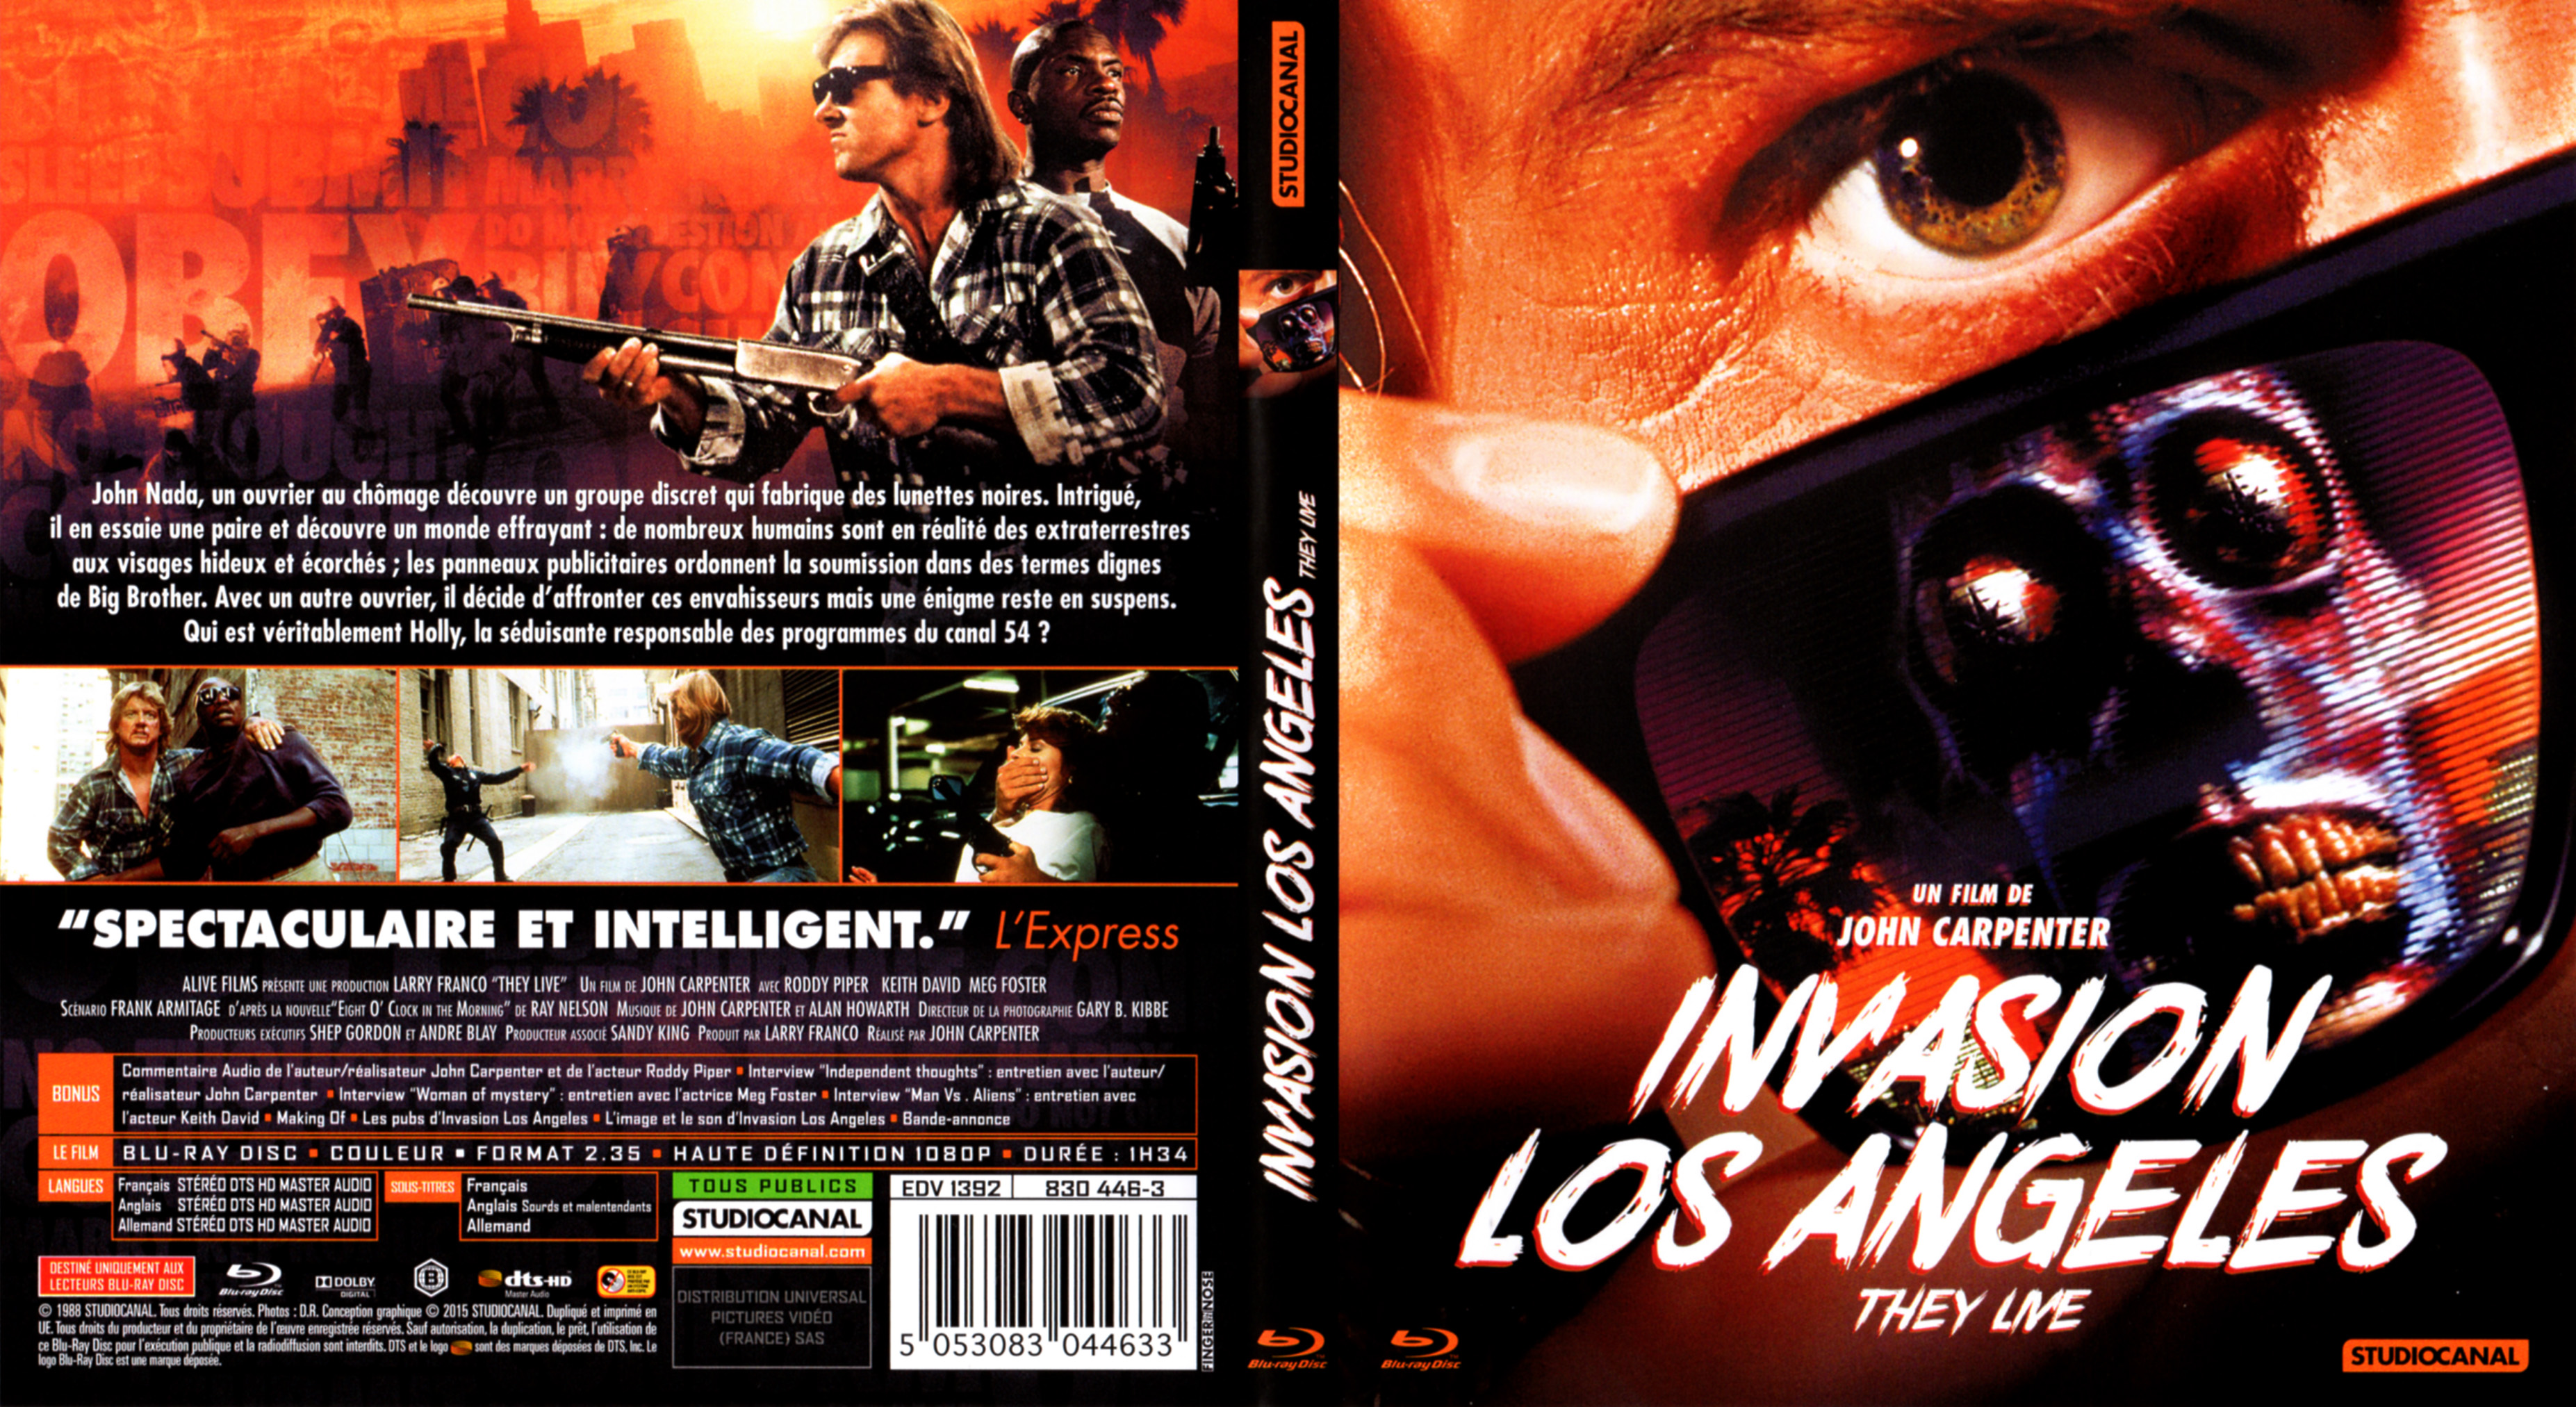 Jaquette DVD Invasion Los Angeles (BLU-RAY)